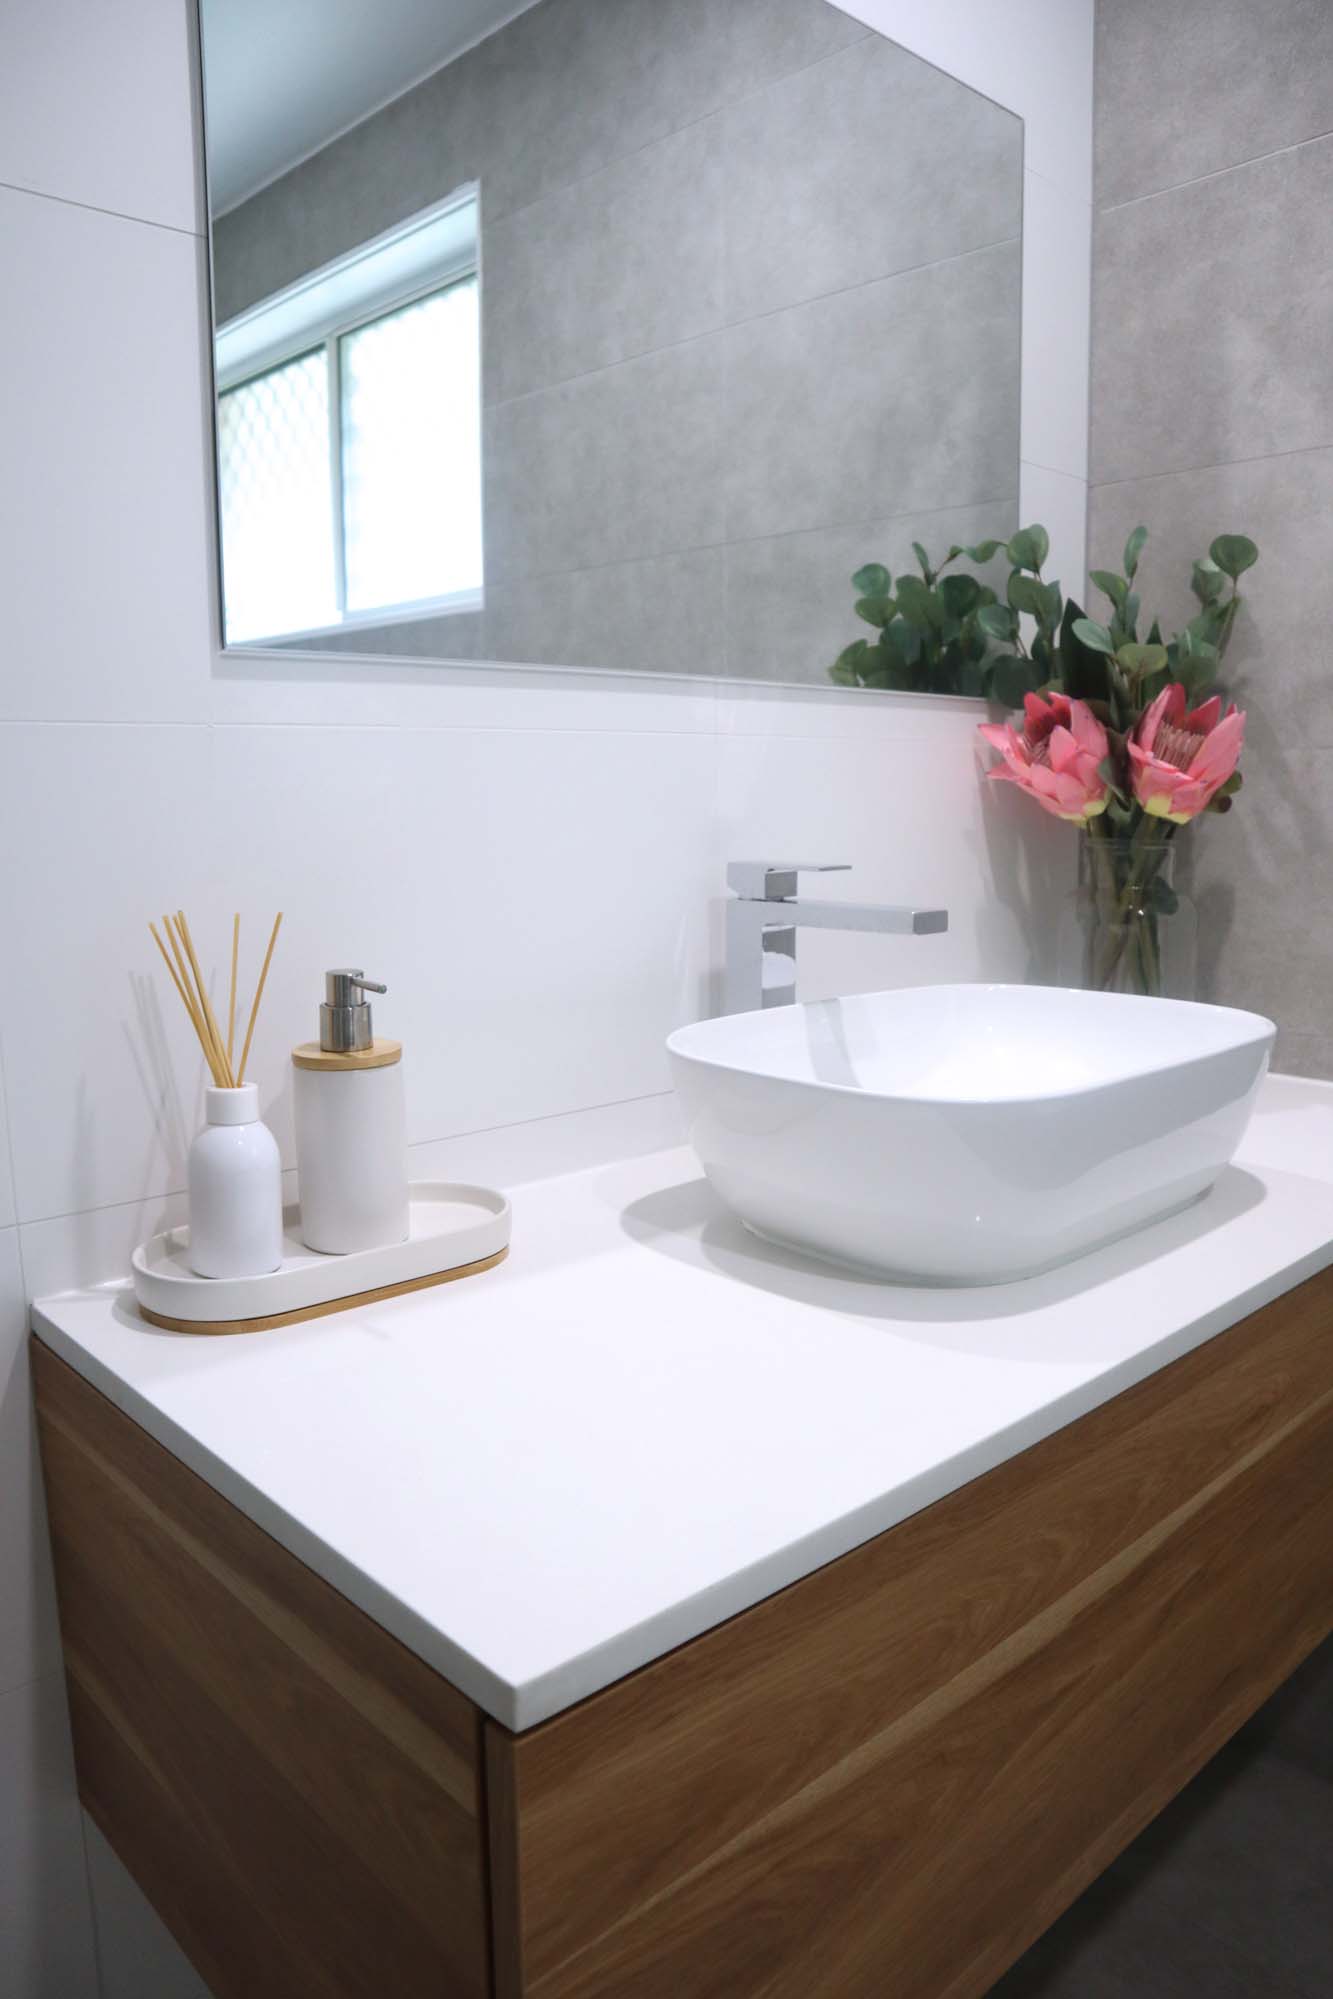 How to Make the Most of a Small Bathroom Remodel Budget